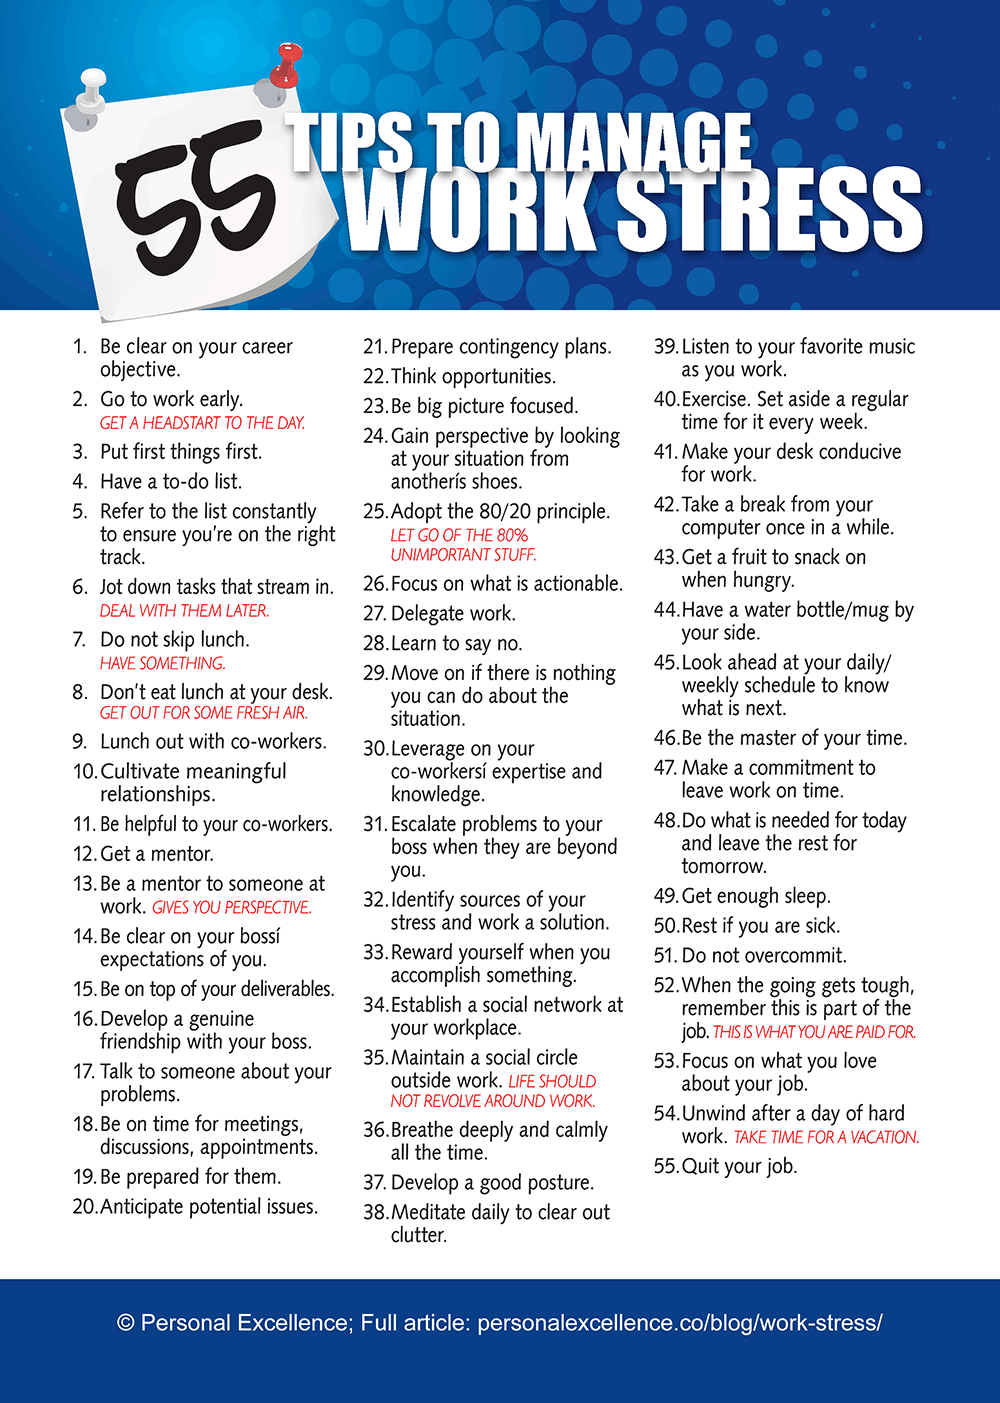 How To Deal With Work Stress